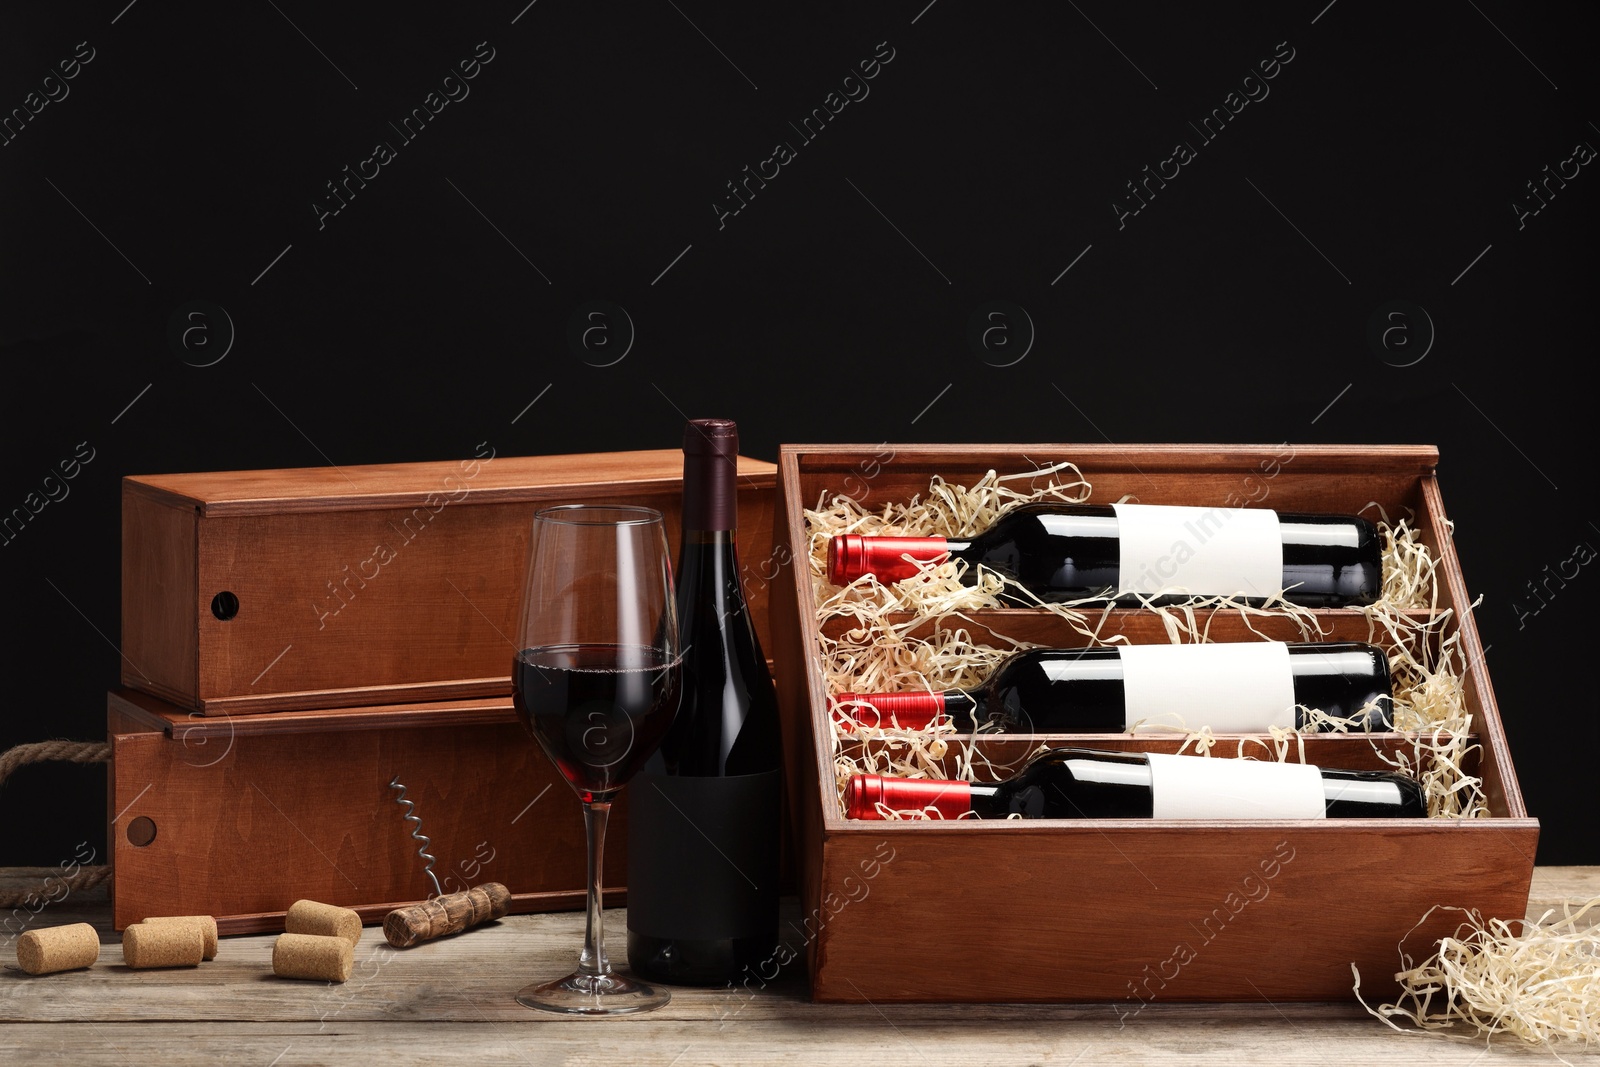 Photo of Box with wine bottles, glass, corks and corkscrew on wooden table against black background